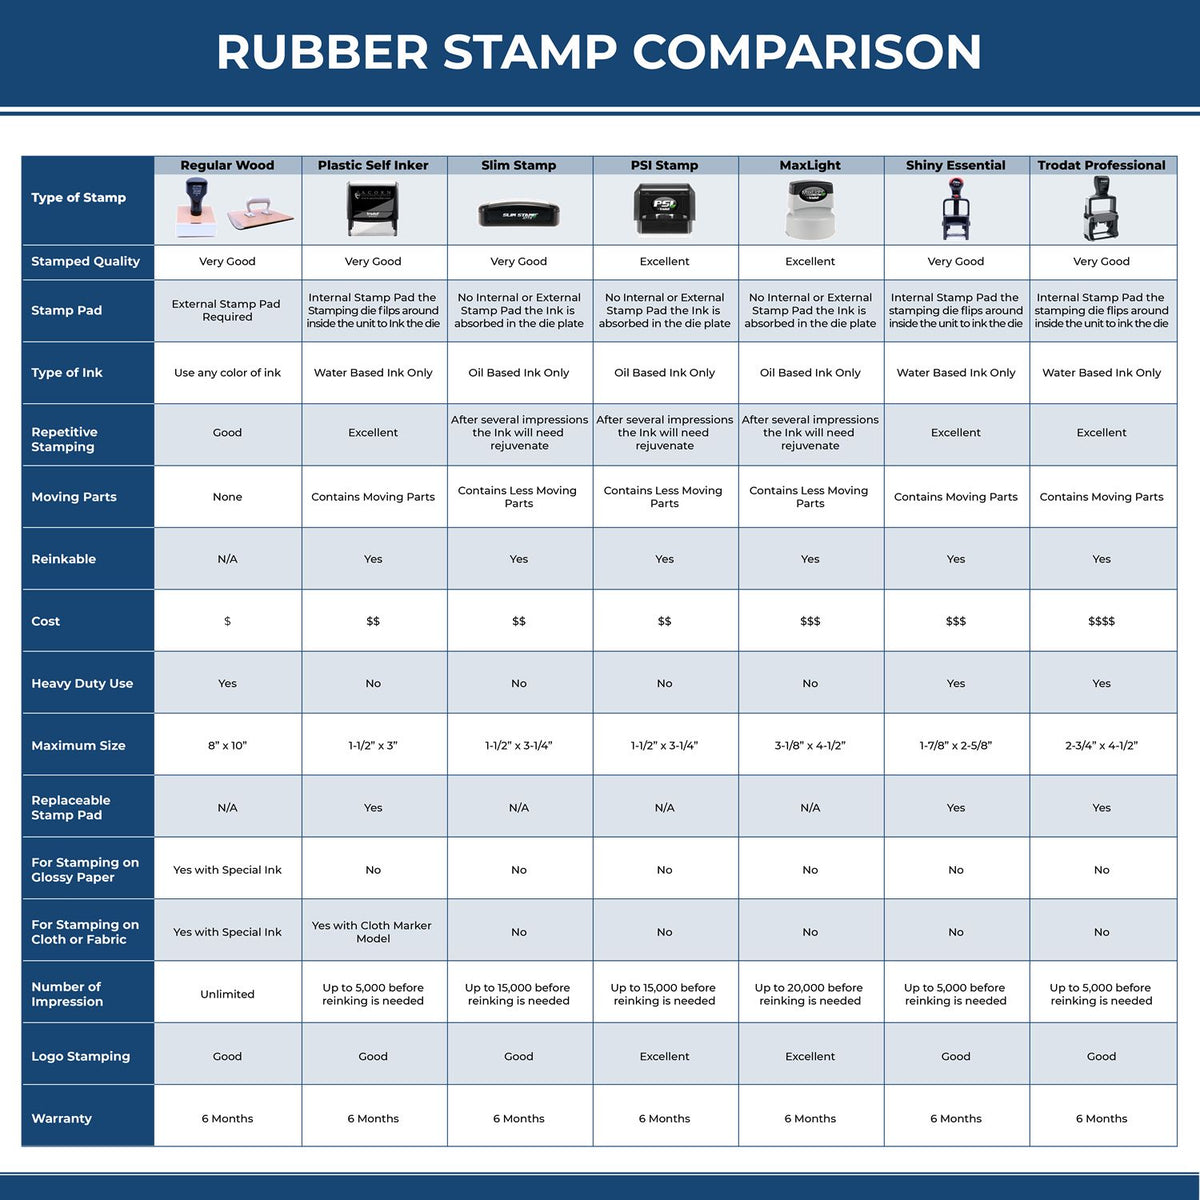 A comparison chart for the different types of mount models available for the Super Slim South Carolina Notary Public Stamp.